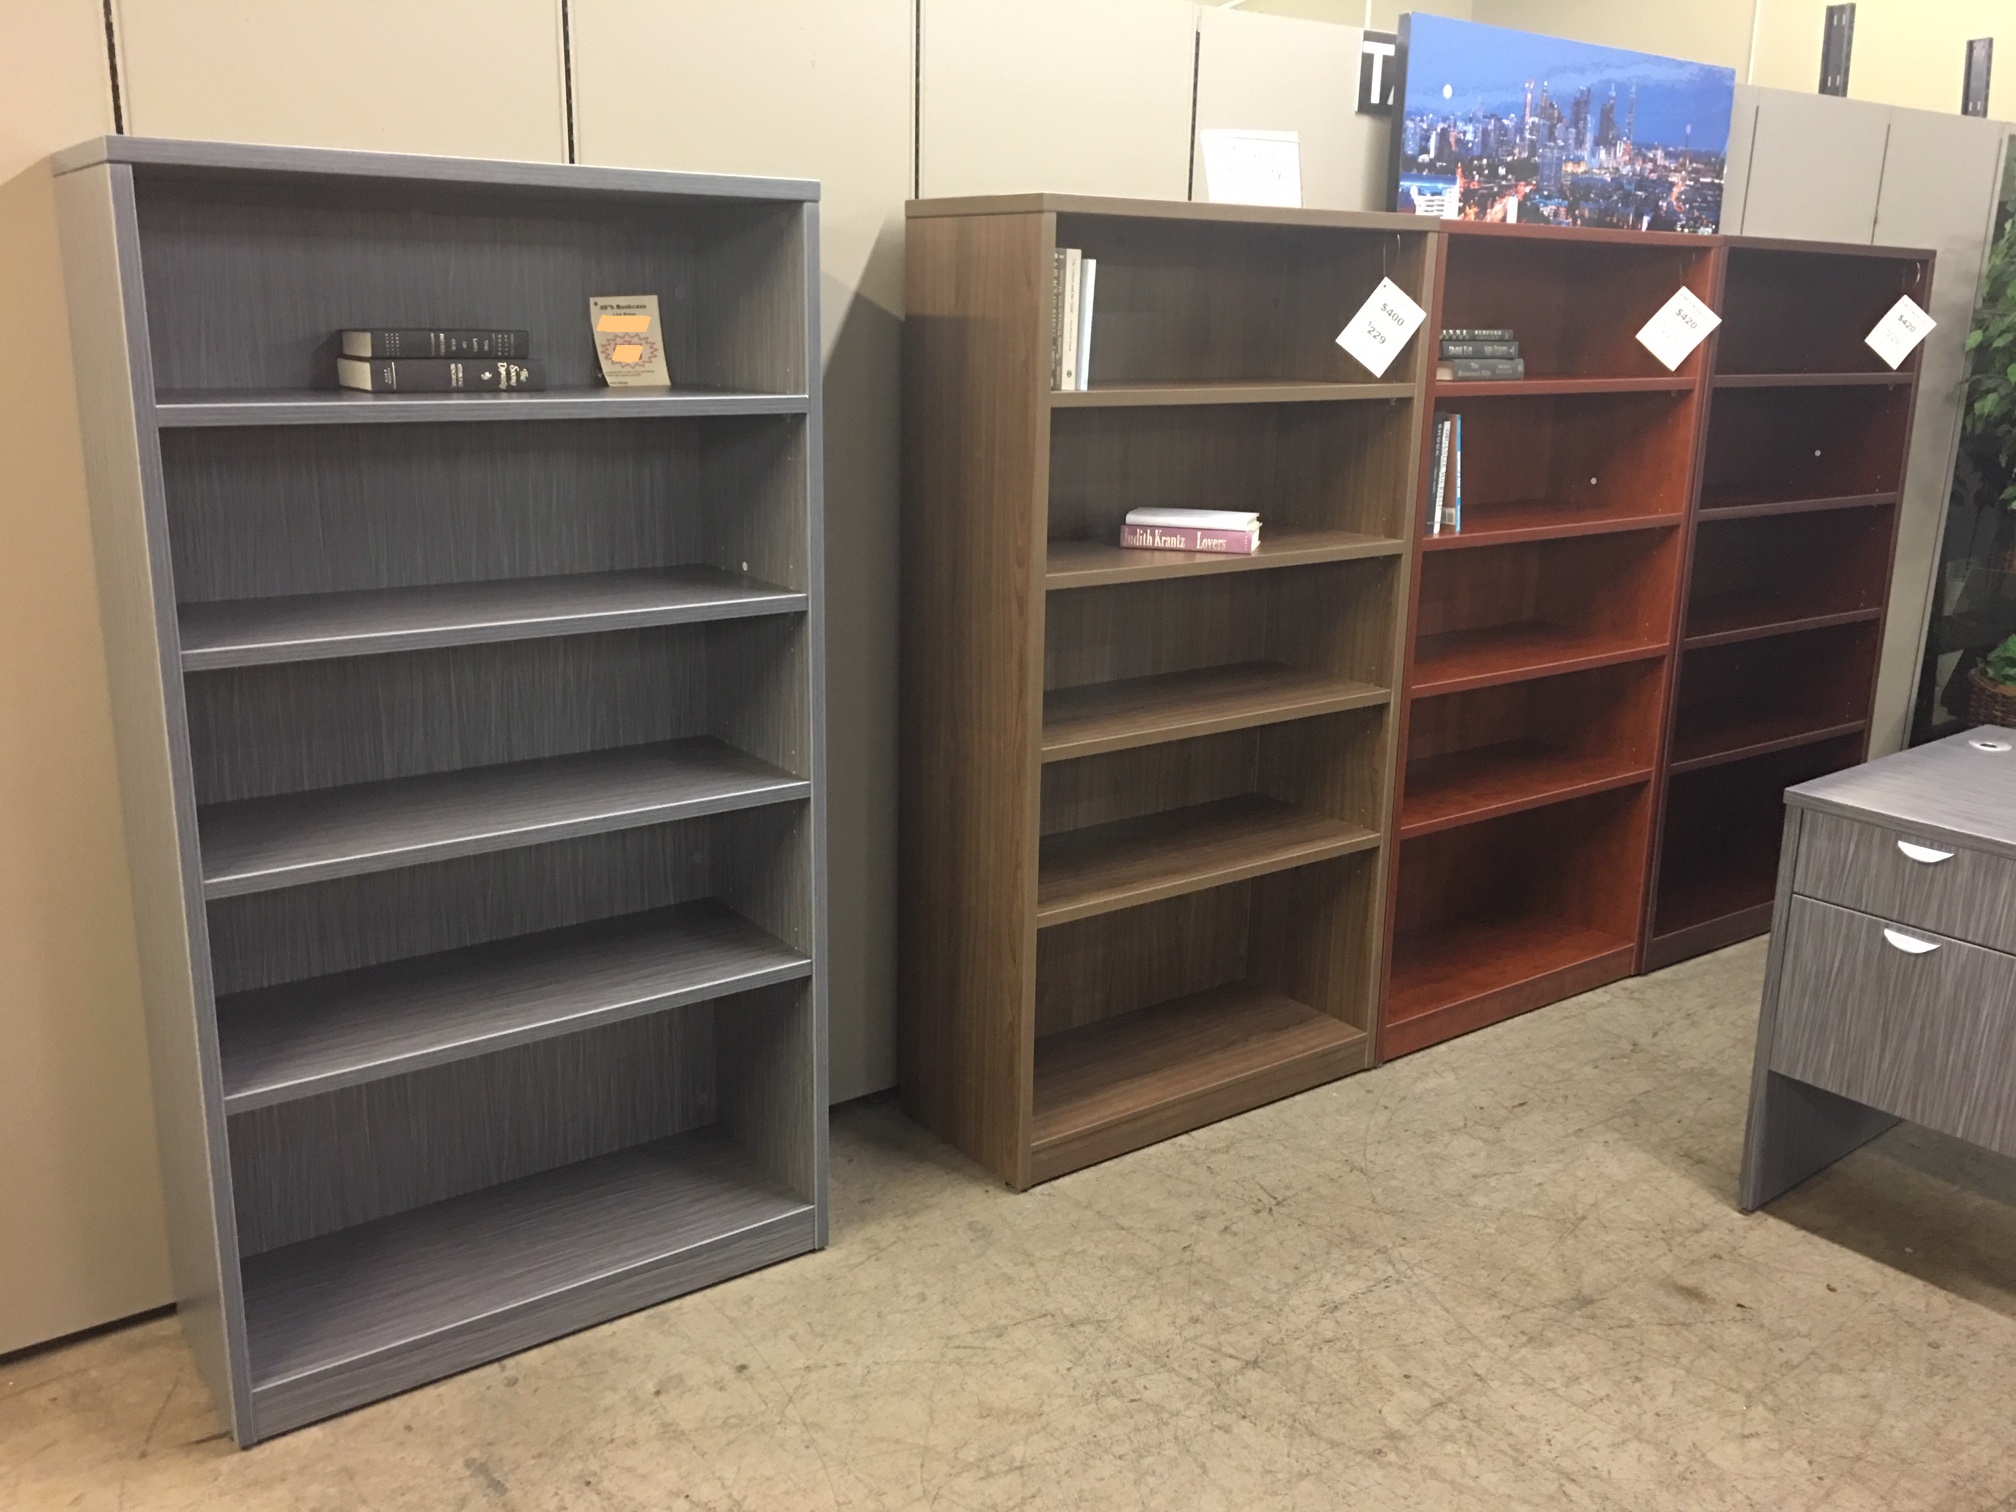 Bookcases in Office Overlooking City